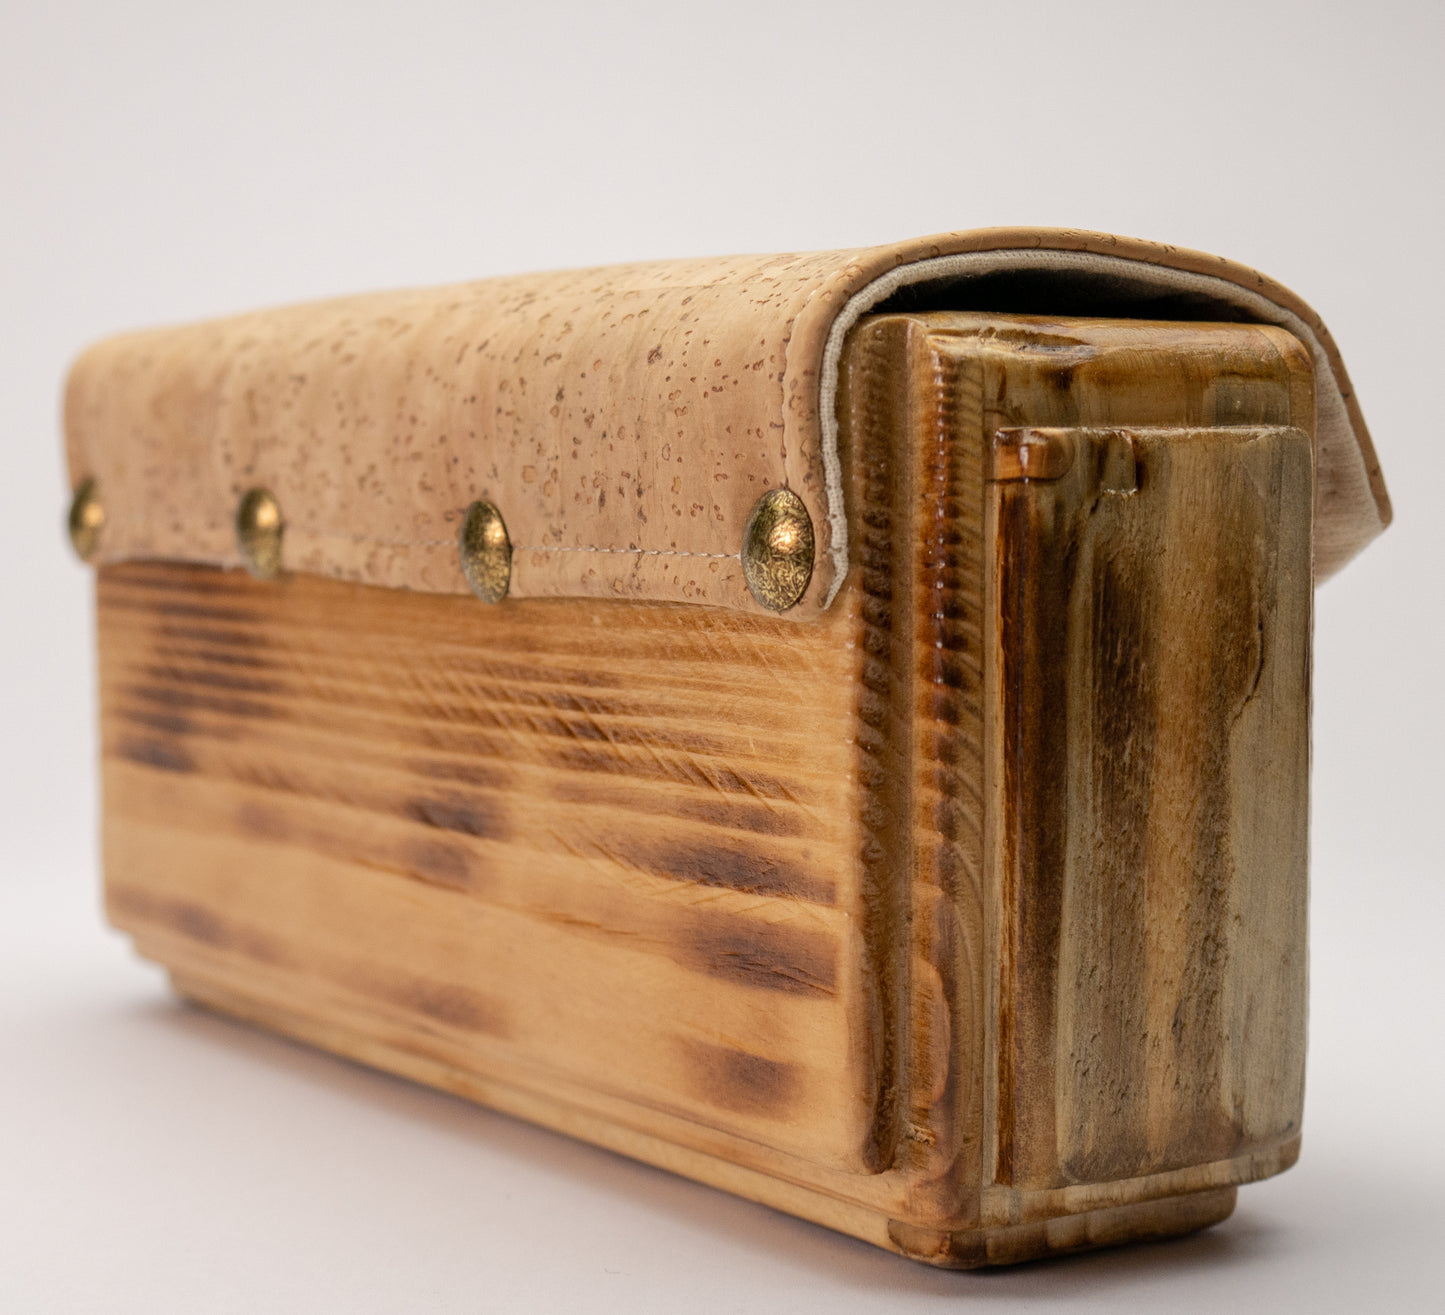 Wooden handmade purse in brown with natural cork leather.